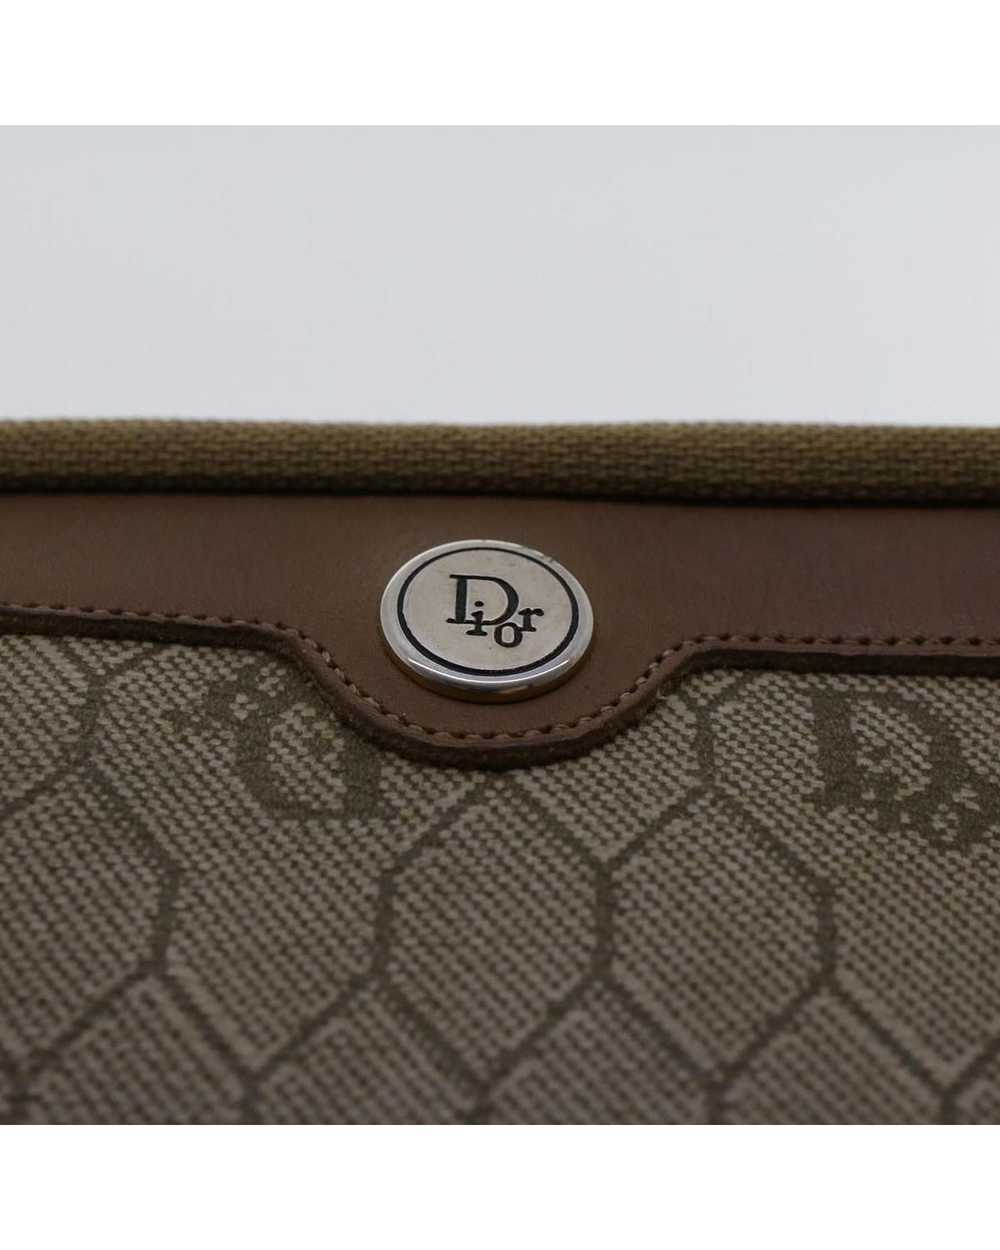 Dior Honeycomb Canvas Clutch by Dior - image 10